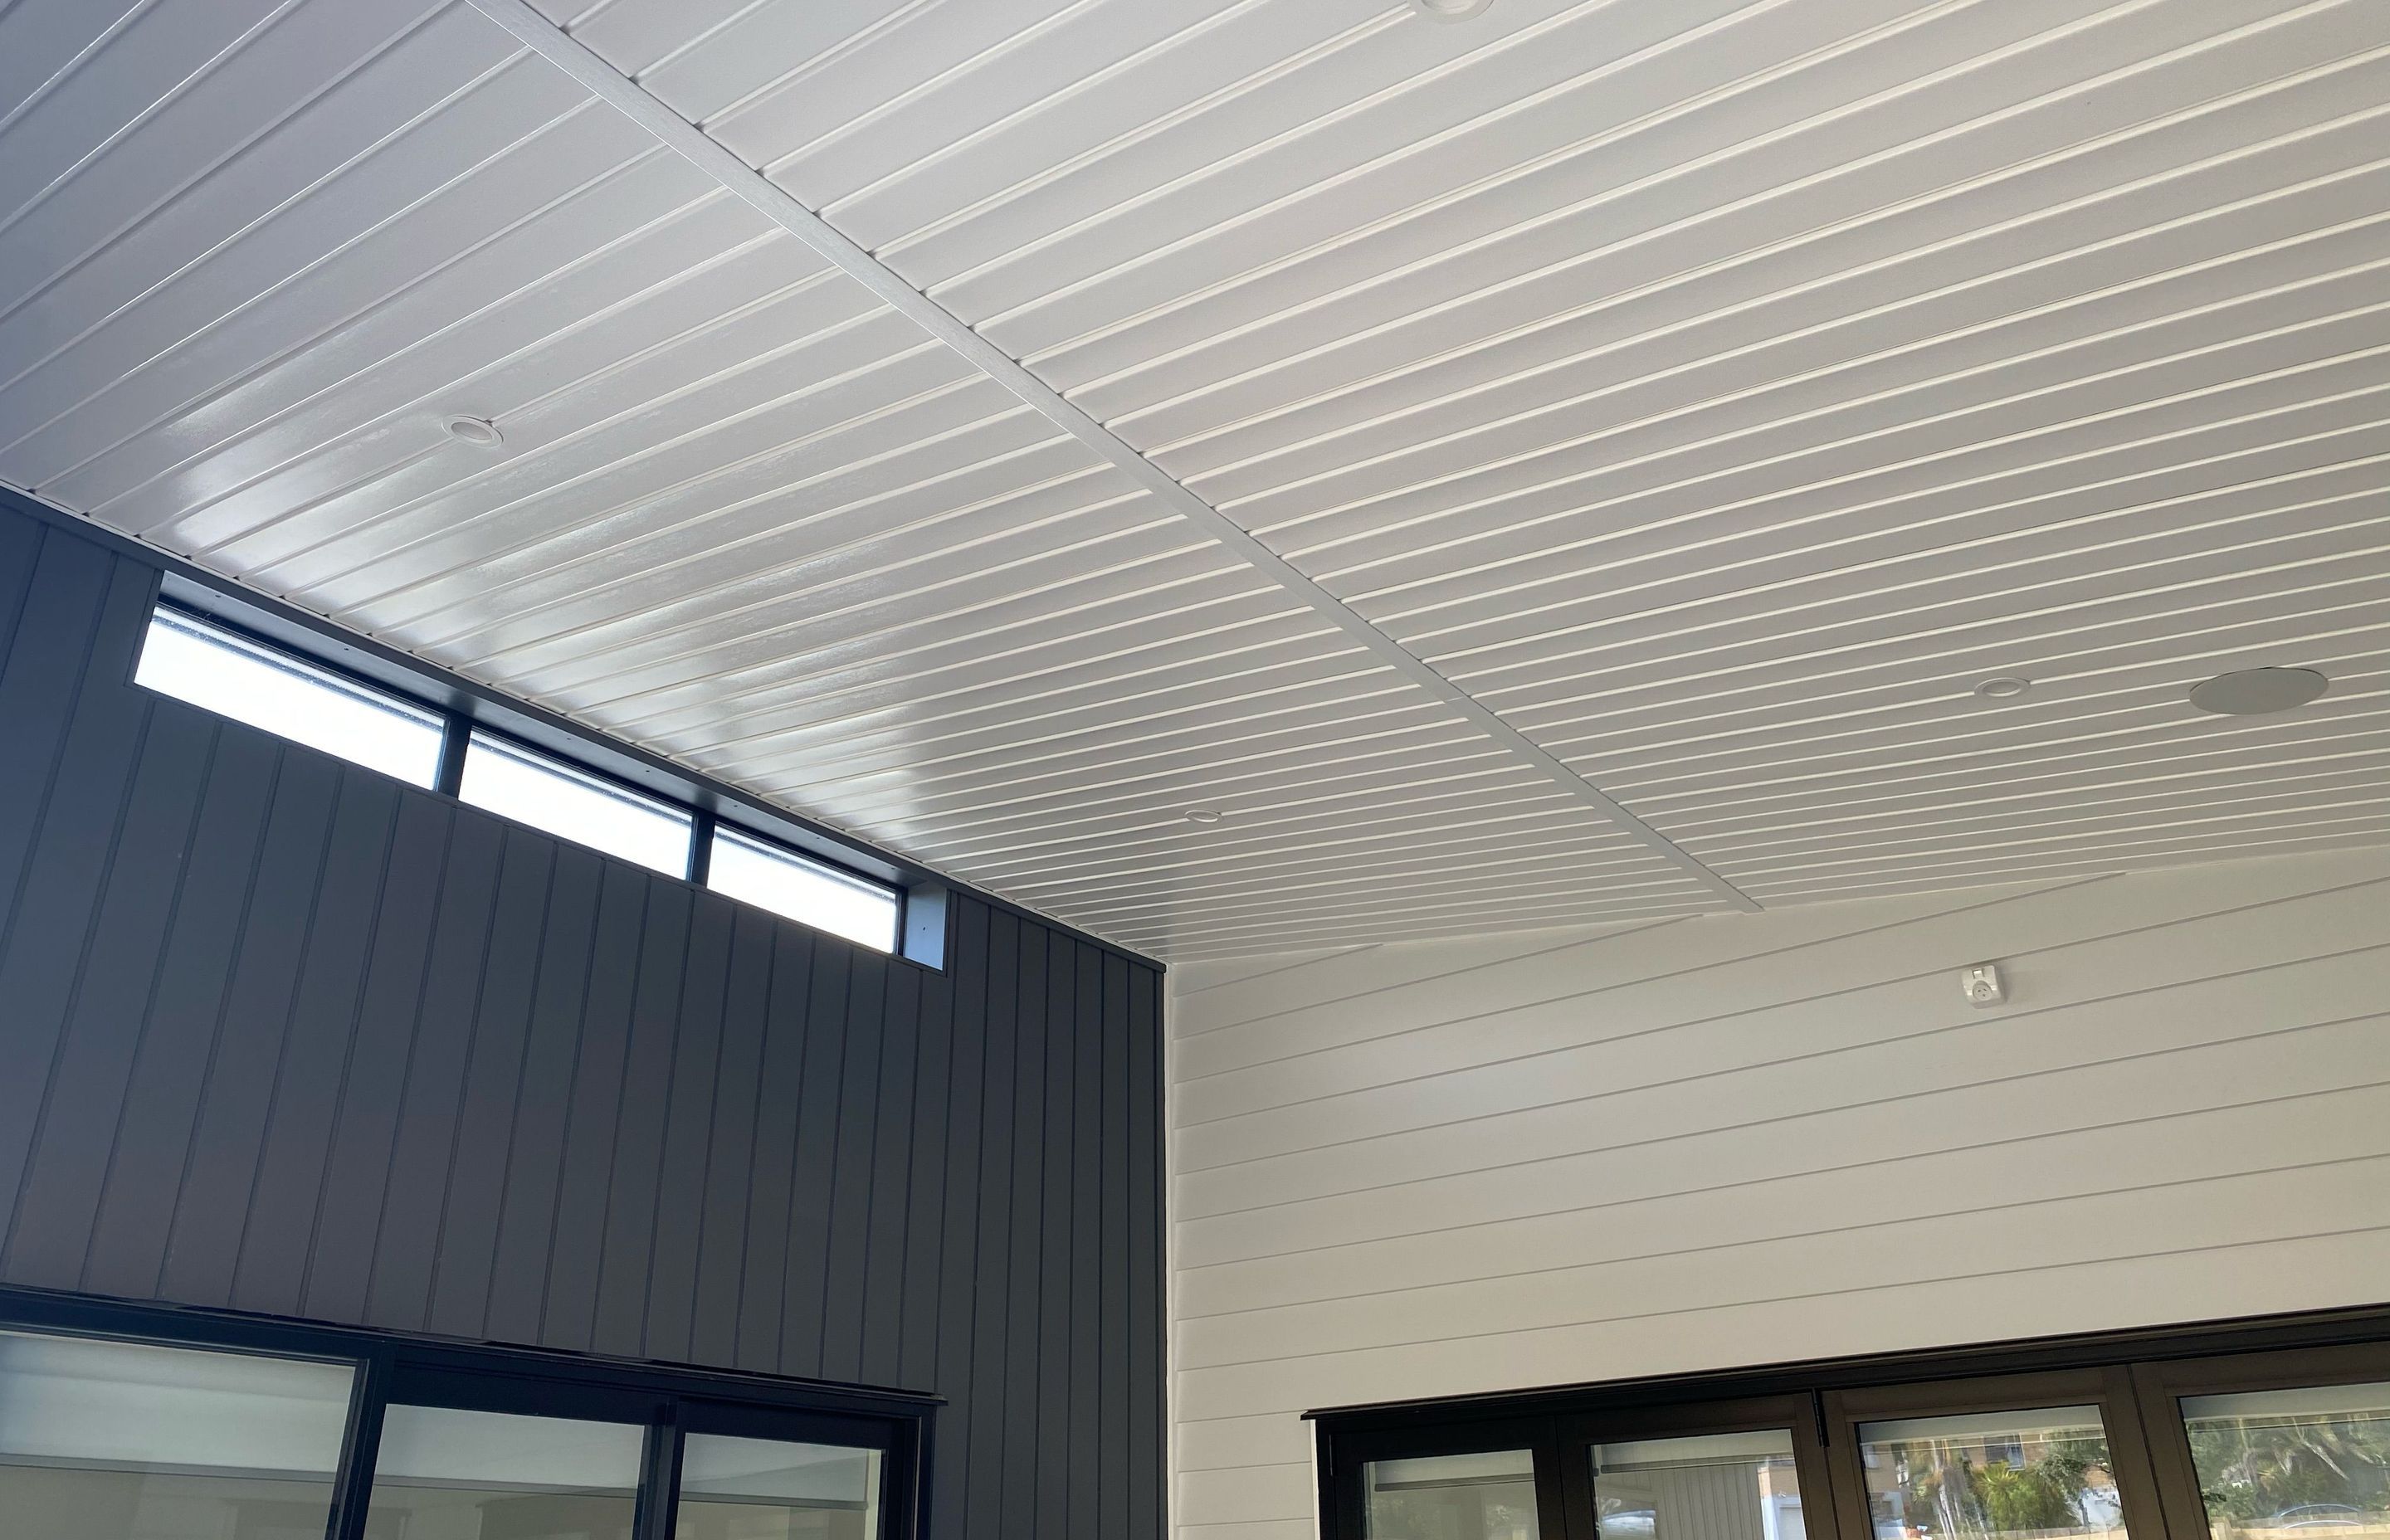 Beautiful Design and a Perfect Finish creates Soffit with WOW Factor!